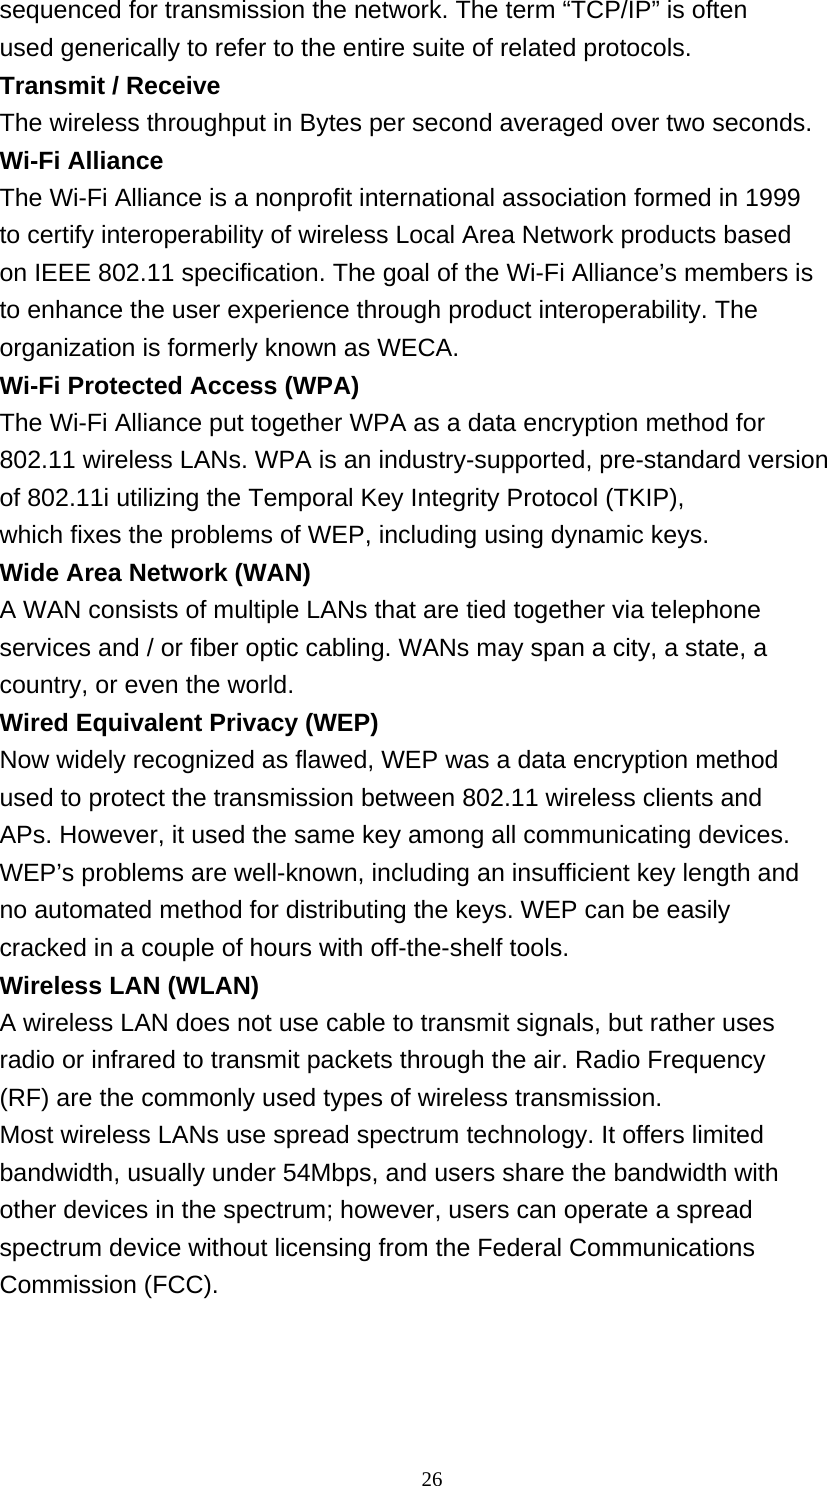    26 sequenced for transmission the network. The term “TCP/IP” is often used generically to refer to the entire suite of related protocols. Transmit / Receive The wireless throughput in Bytes per second averaged over two seconds. Wi-Fi Alliance The Wi-Fi Alliance is a nonprofit international association formed in 1999 to certify interoperability of wireless Local Area Network products based on IEEE 802.11 specification. The goal of the Wi-Fi Alliance’s members is to enhance the user experience through product interoperability. The organization is formerly known as WECA. Wi-Fi Protected Access (WPA) The Wi-Fi Alliance put together WPA as a data encryption method for 802.11 wireless LANs. WPA is an industry-supported, pre-standard version of 802.11i utilizing the Temporal Key Integrity Protocol (TKIP), which fixes the problems of WEP, including using dynamic keys. Wide Area Network (WAN) A WAN consists of multiple LANs that are tied together via telephone services and / or fiber optic cabling. WANs may span a city, a state, a country, or even the world. Wired Equivalent Privacy (WEP) Now widely recognized as flawed, WEP was a data encryption method used to protect the transmission between 802.11 wireless clients and APs. However, it used the same key among all communicating devices. WEP’s problems are well-known, including an insufficient key length and no automated method for distributing the keys. WEP can be easily cracked in a couple of hours with off-the-shelf tools. Wireless LAN (WLAN) A wireless LAN does not use cable to transmit signals, but rather uses radio or infrared to transmit packets through the air. Radio Frequency (RF) are the commonly used types of wireless transmission. Most wireless LANs use spread spectrum technology. It offers limited bandwidth, usually under 54Mbps, and users share the bandwidth with other devices in the spectrum; however, users can operate a spread spectrum device without licensing from the Federal Communications Commission (FCC).   